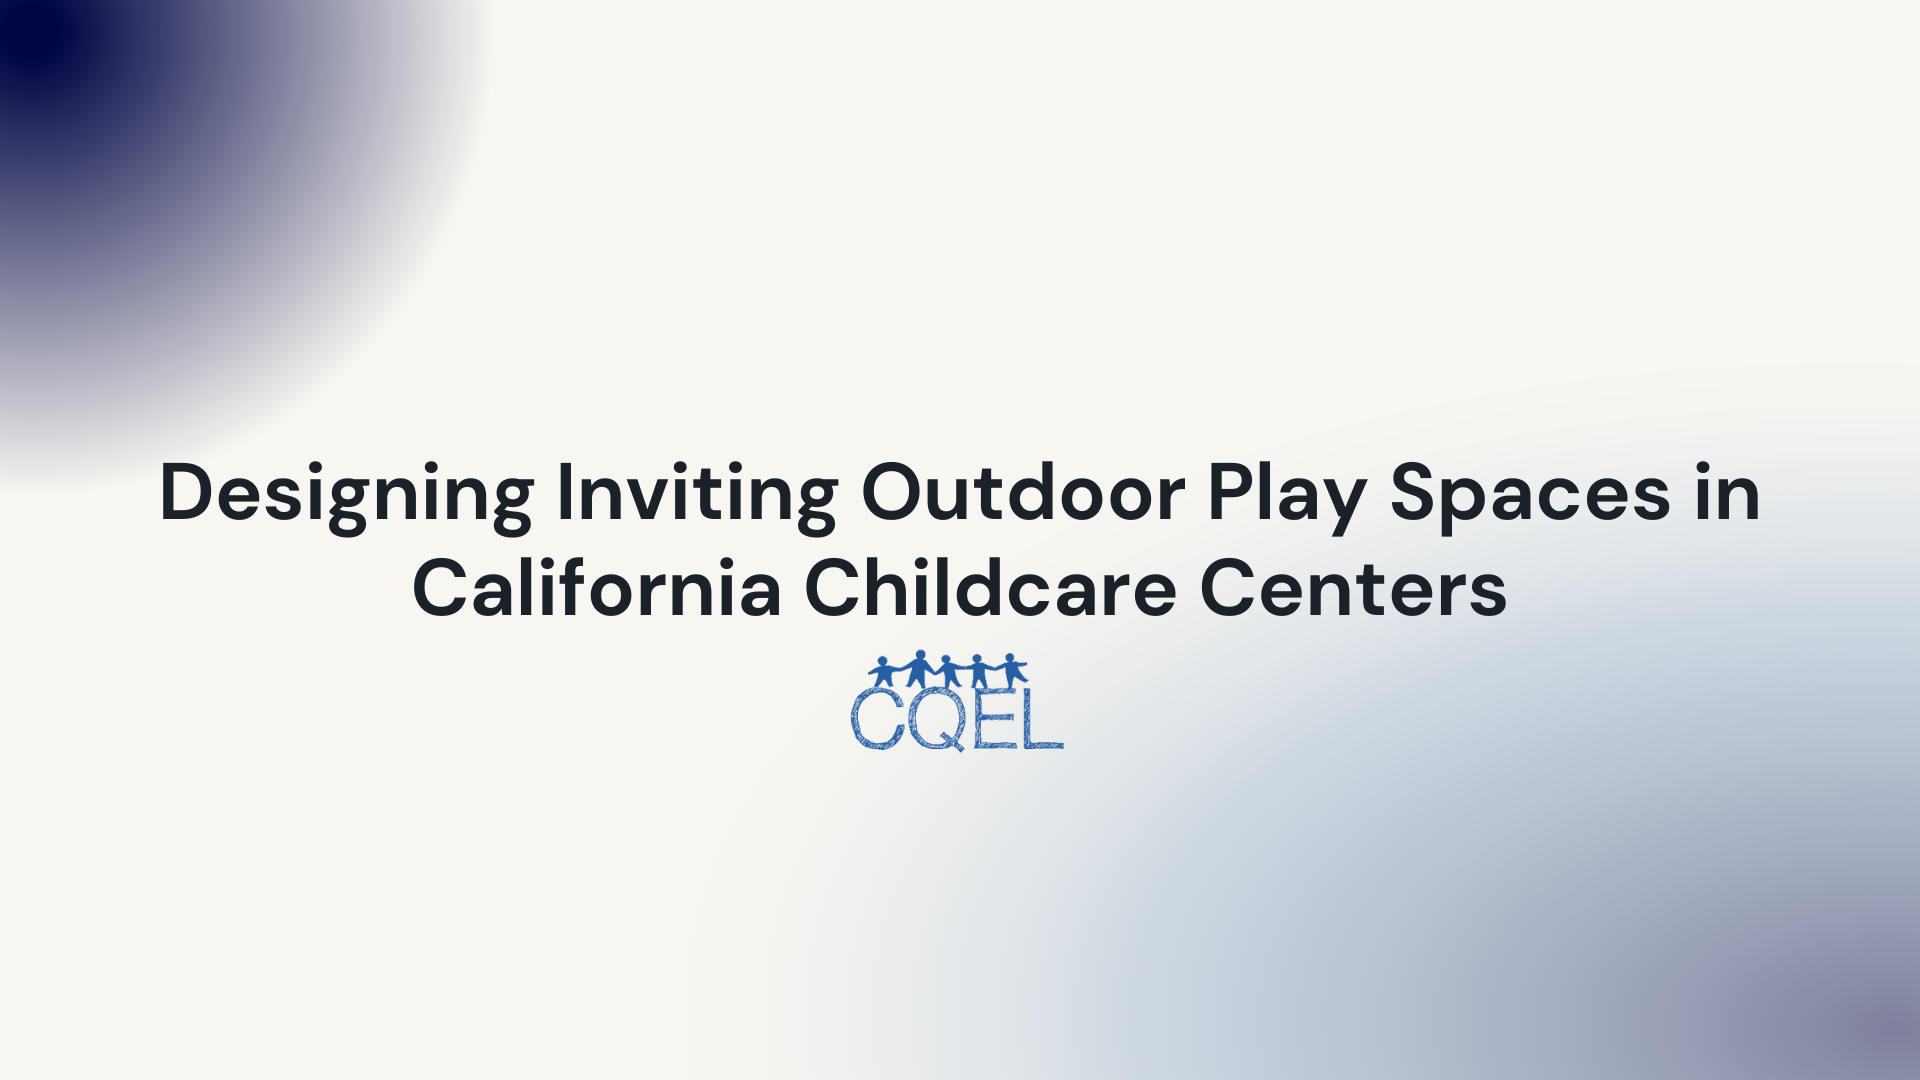 Designing Inviting Outdoor Play Spaces in California Childcare Centers